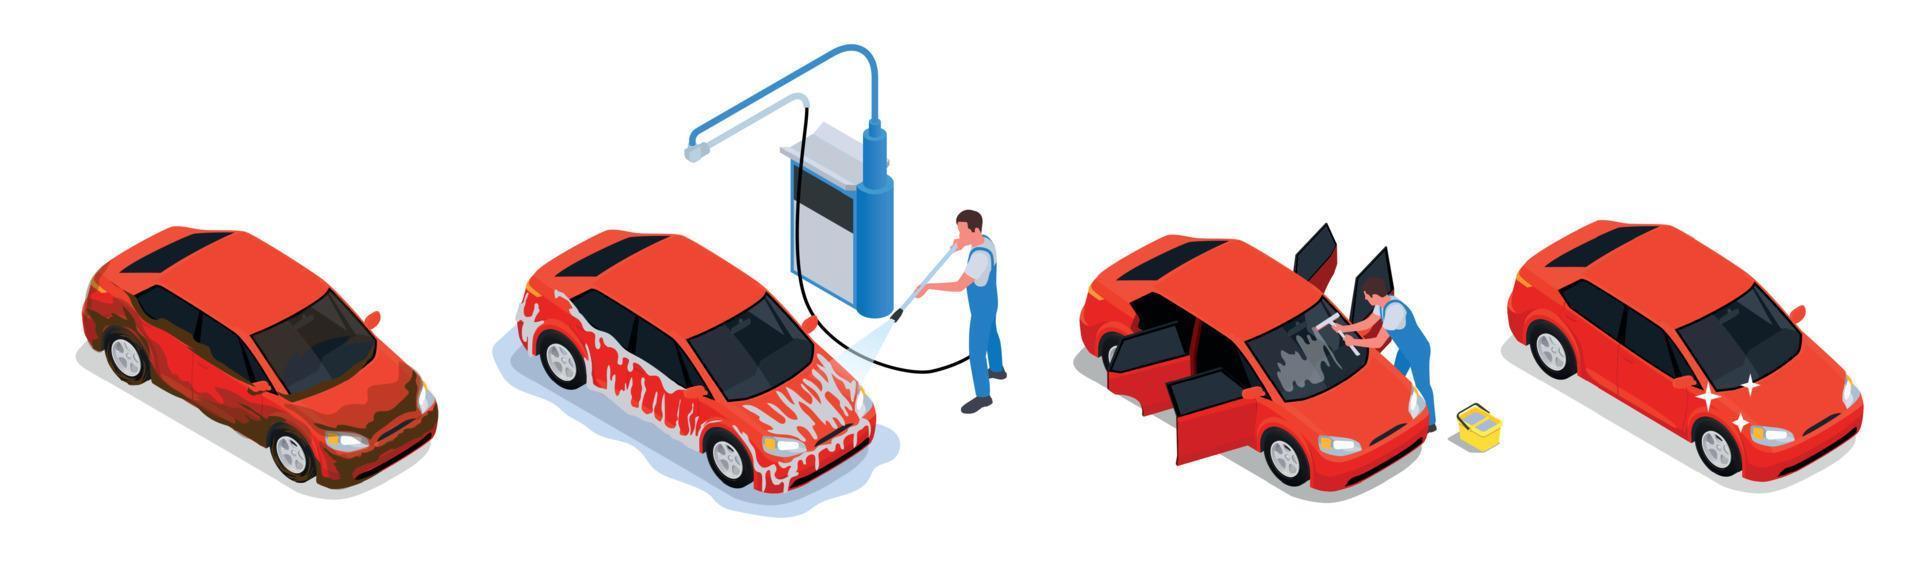 Car Wash Isometric Colored Composition vector